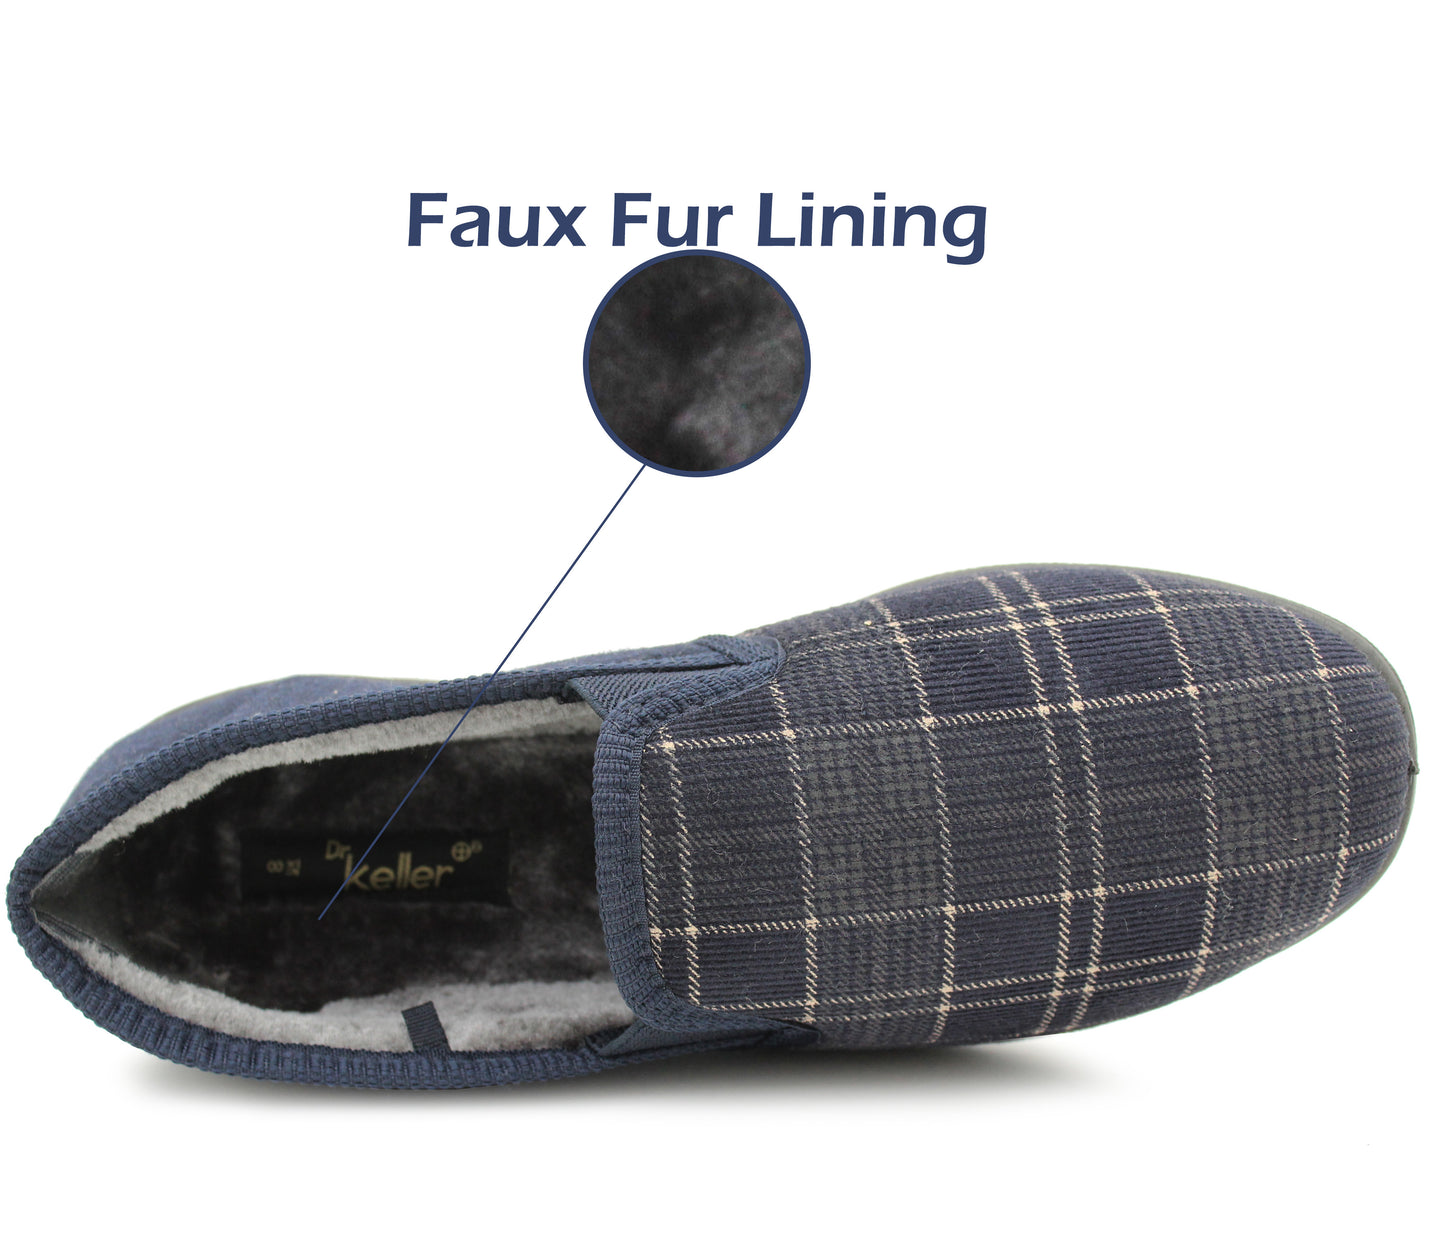 Mens Slip On Navy Check Faux Fur Lined Warm Winter Slippers